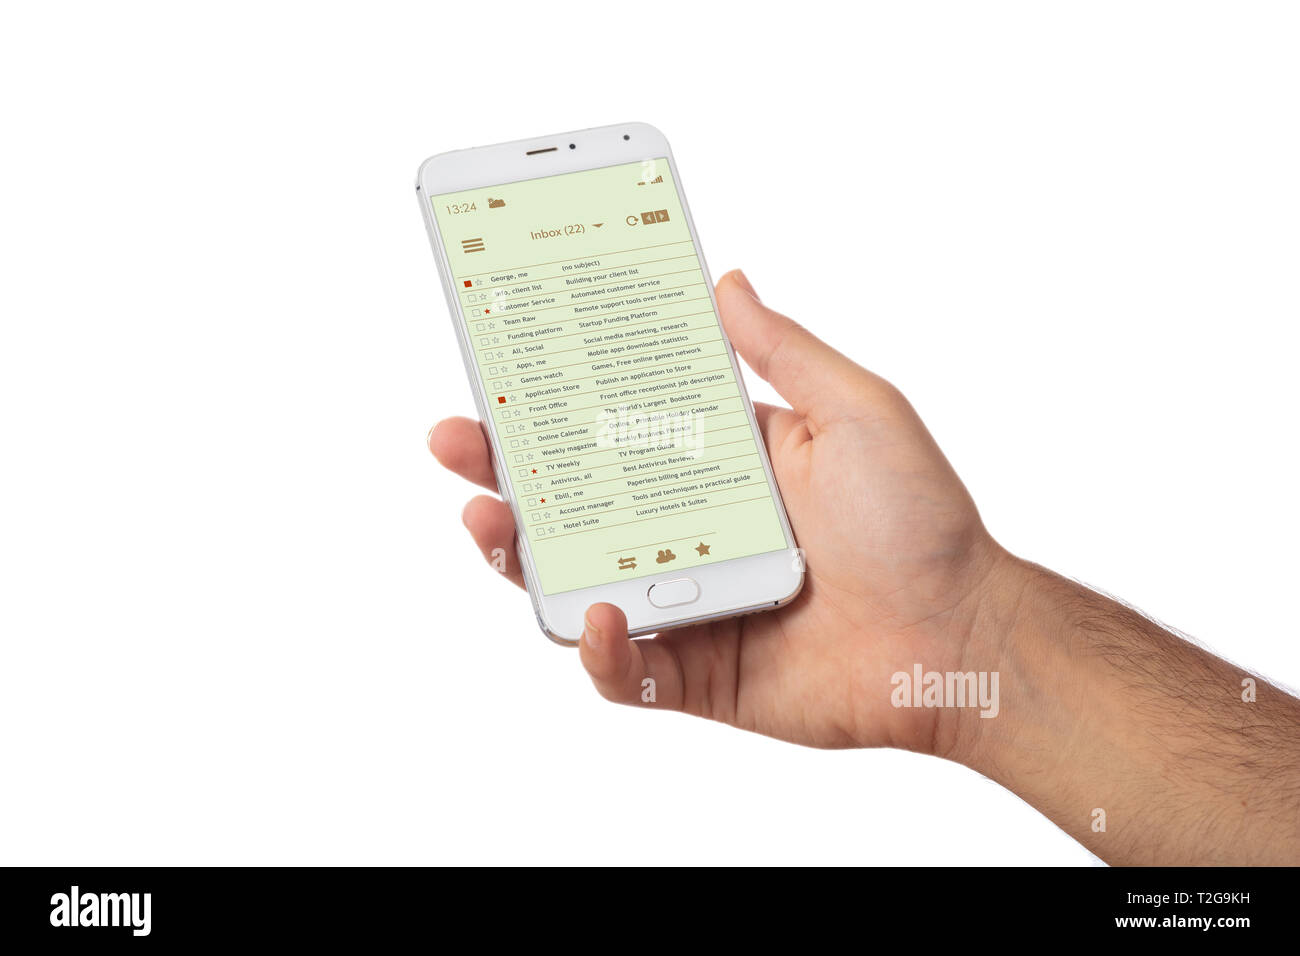 Email on mobile phone. Man hand holding a smartphone, email list on the screen, isolated against white color background Stock Photo